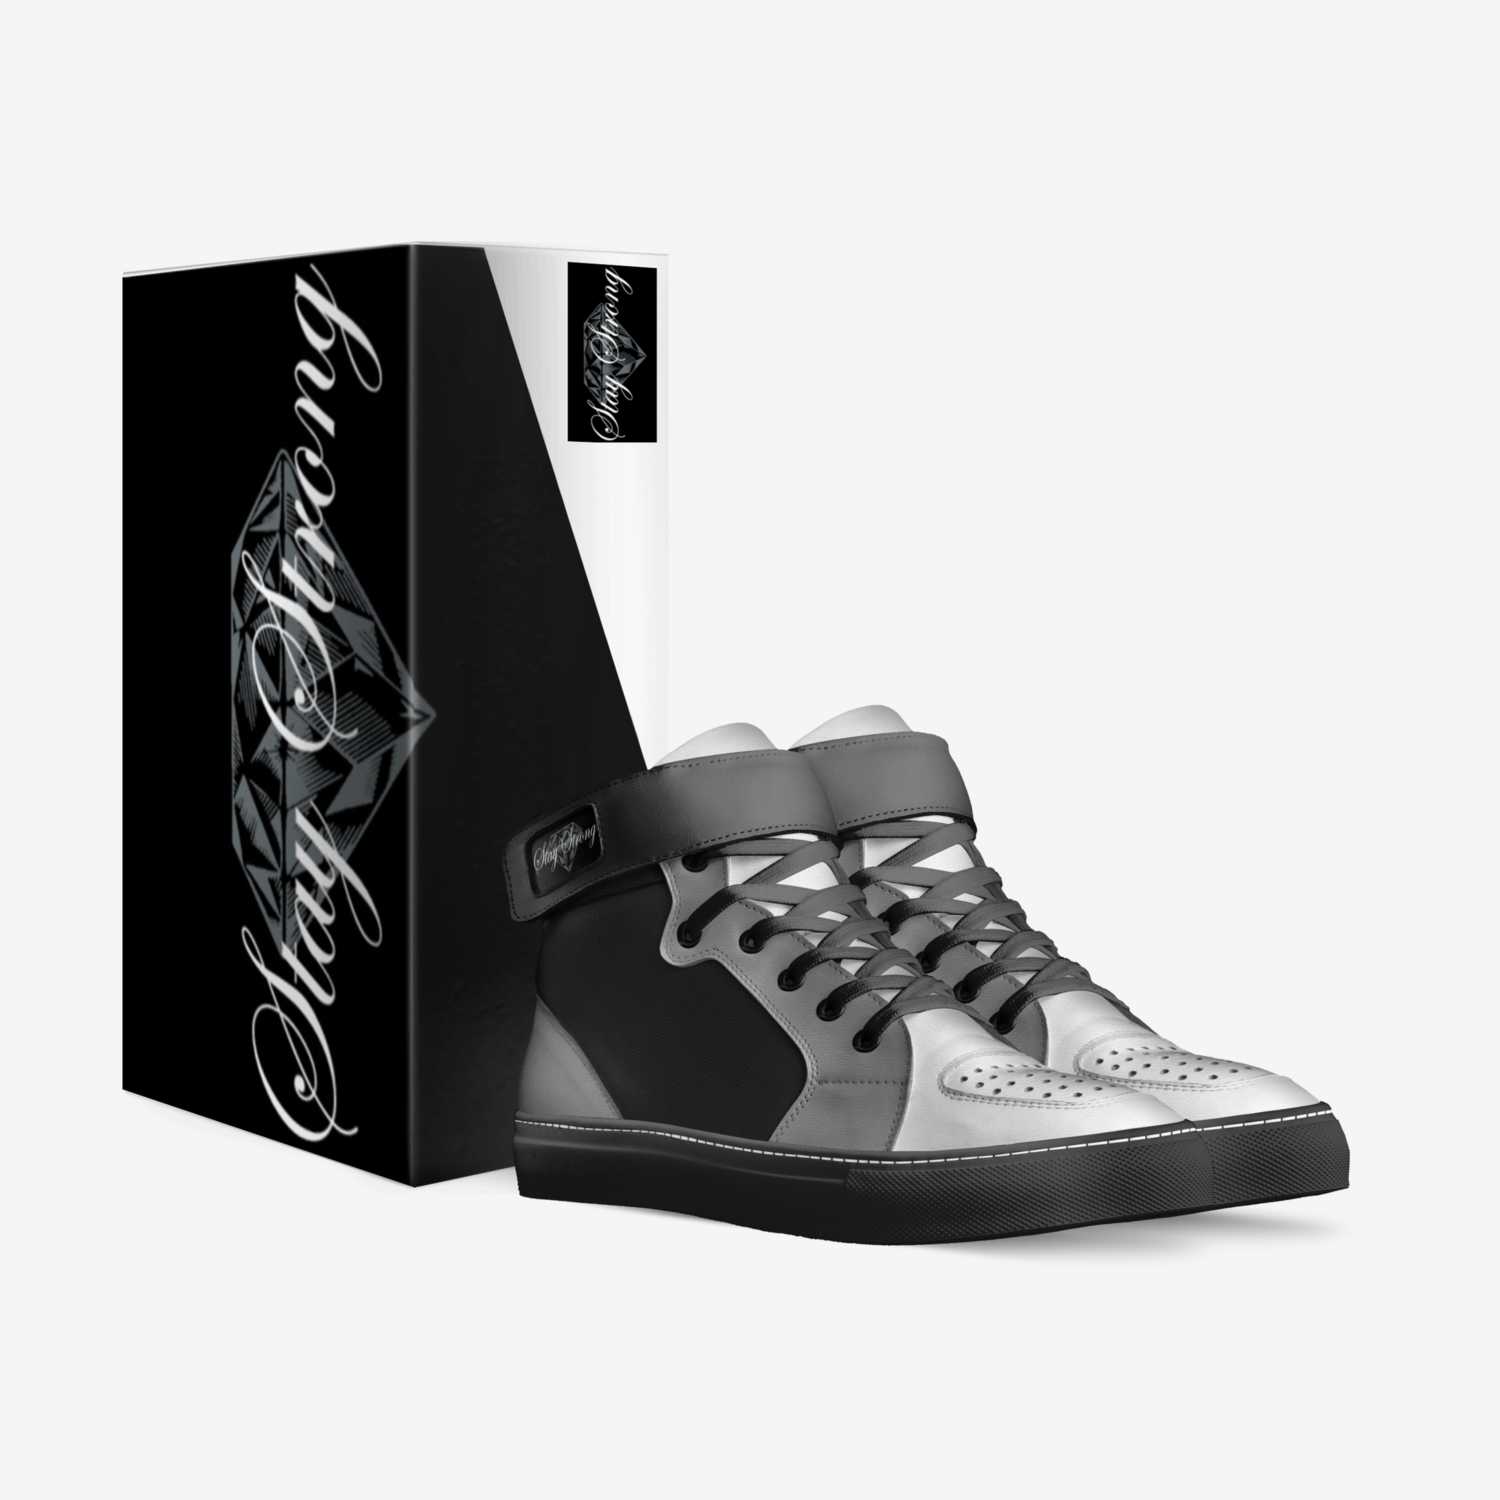 Progress custom made in Italy shoes by Warrior Class Rare | Box view